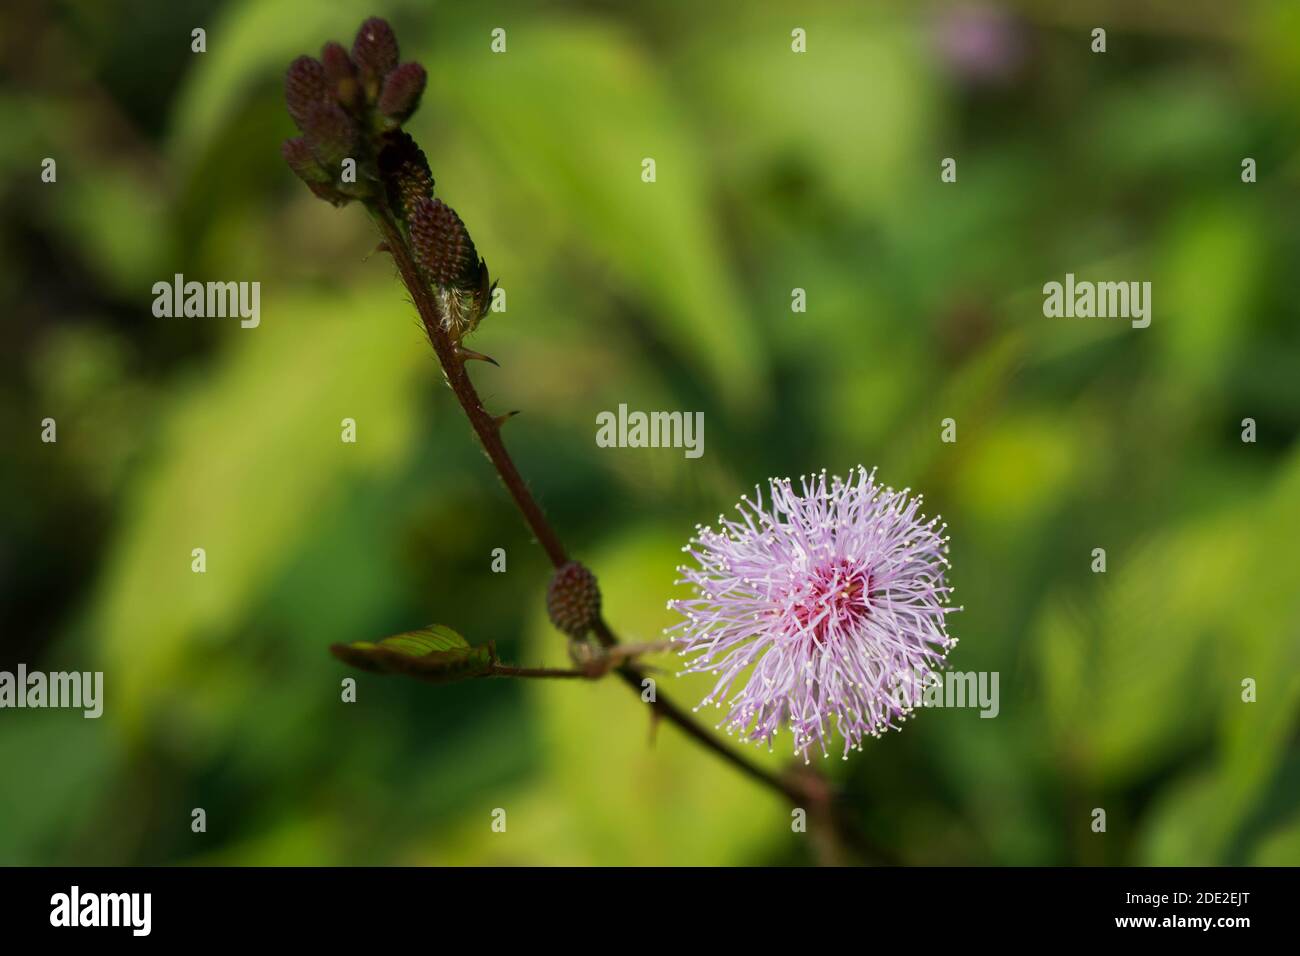 Close up of Mimosa pudica also known as shame plant or shameplant, sensitive, sleepy, action, touch-me-not, zombie plant. Stock Photo